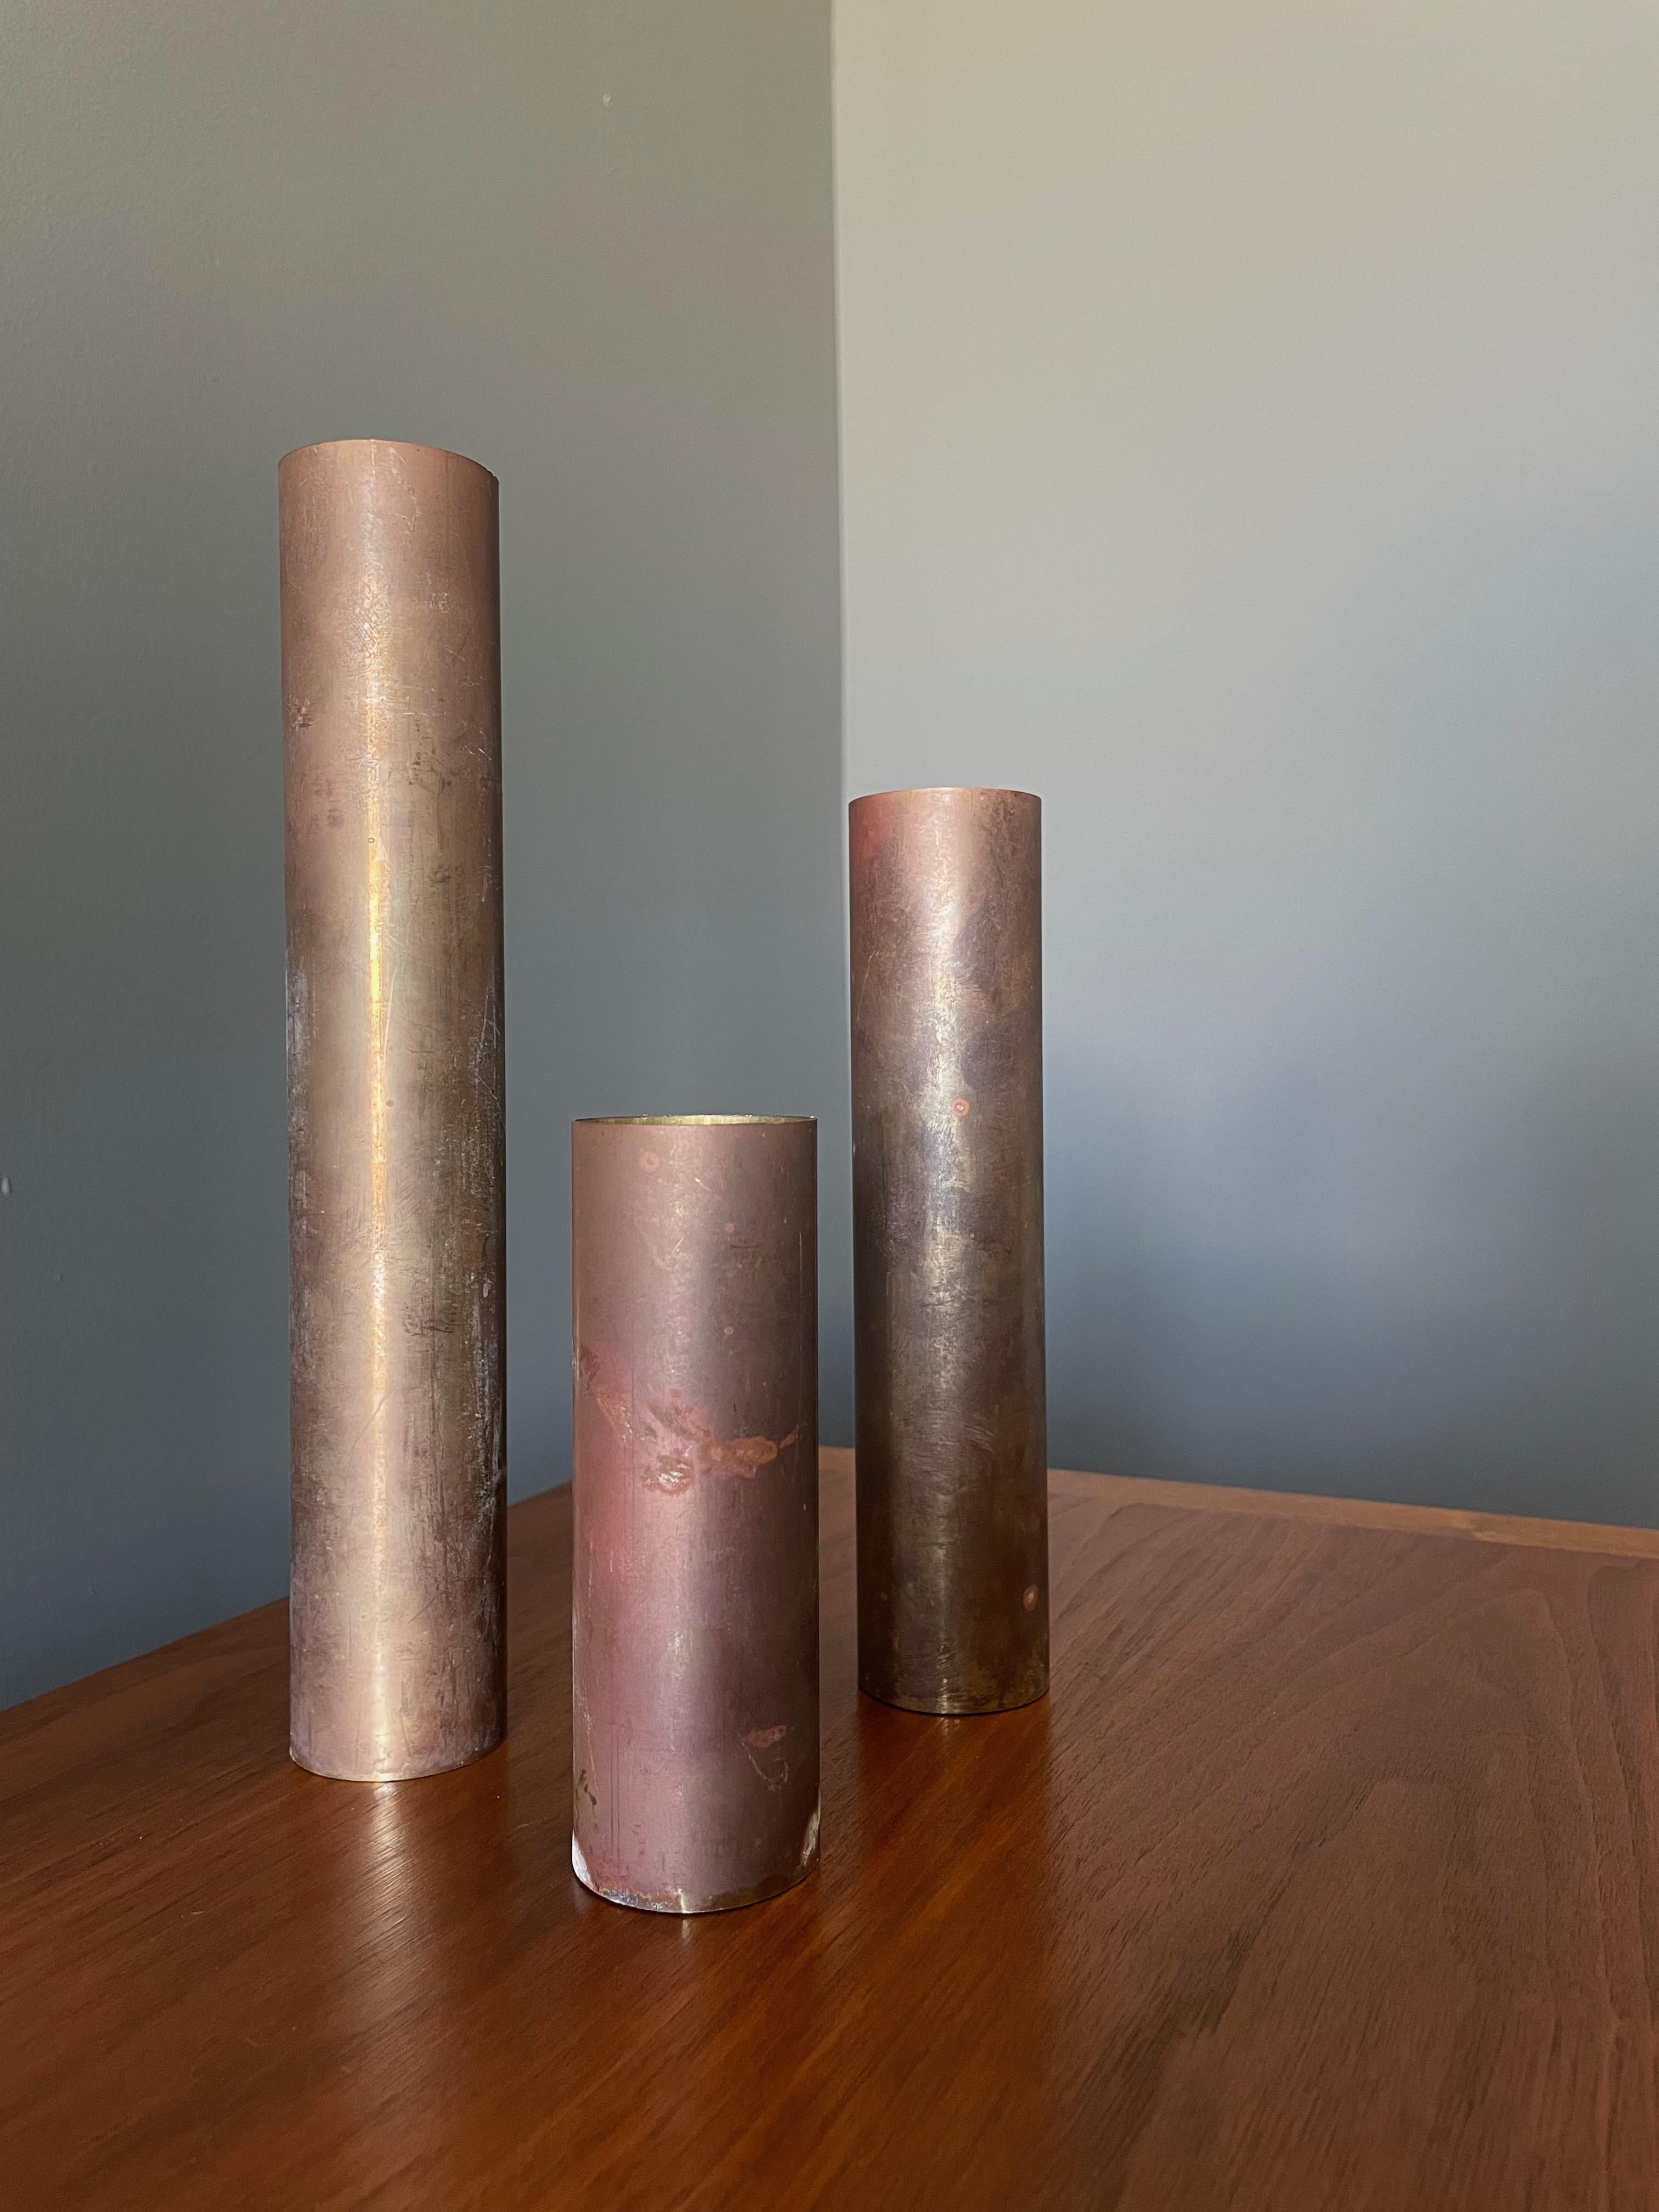 Trio of brass candle holders with heavy patina. Simple cylindrical design. Each holds a standard size votive candle. Graduating in size from 9.75